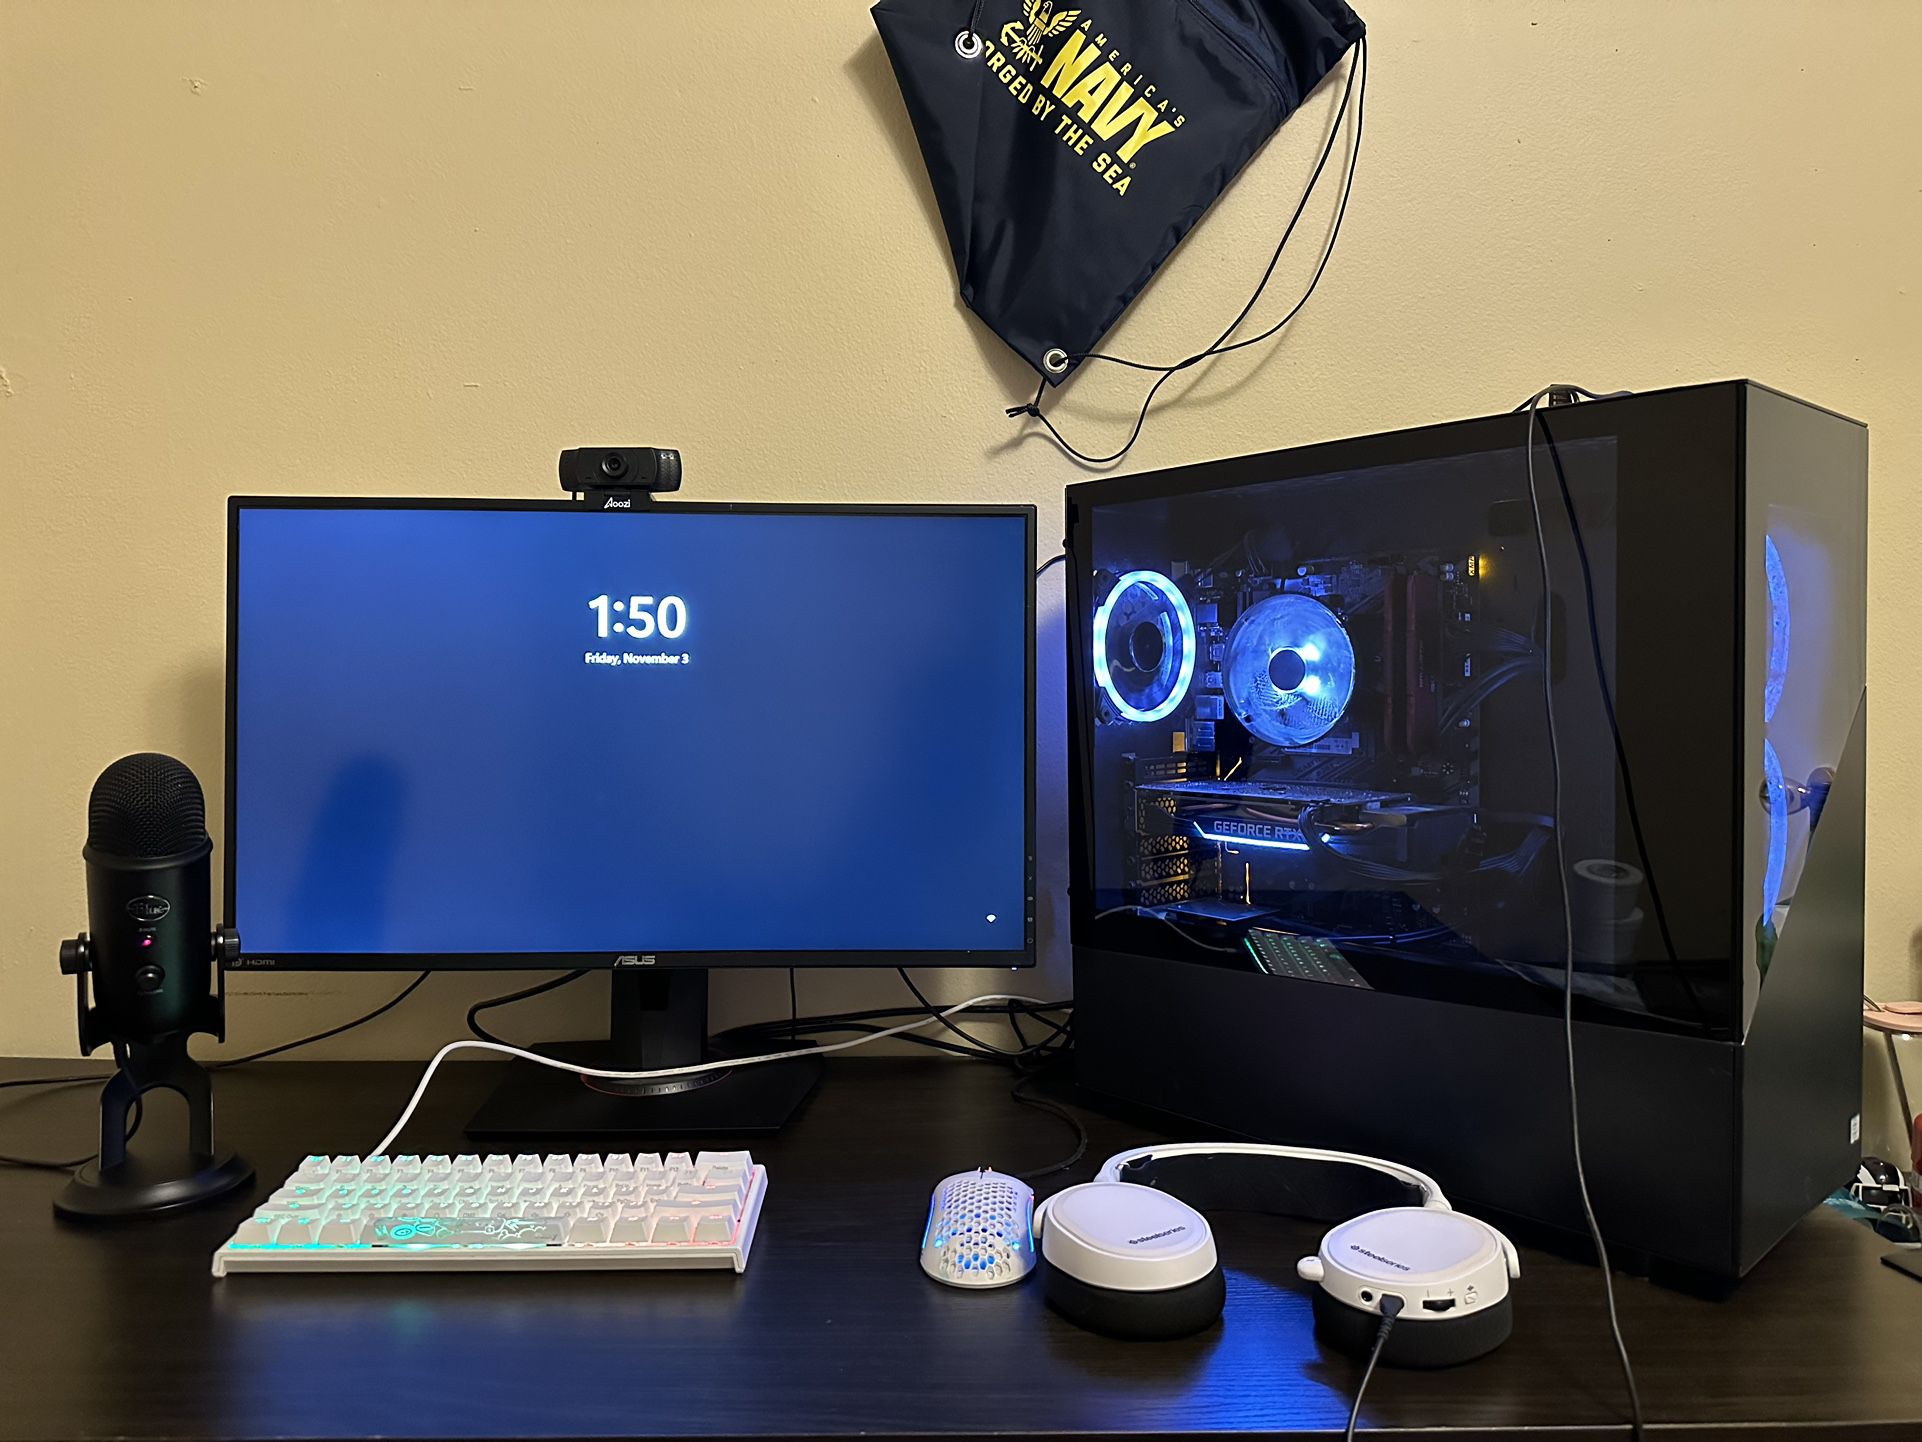 Cyber Power PC / ASUS 144 HZ Monitor / Model O Mouse / Ducky One 2 Mini Keyboard / Blue Yeti Mic